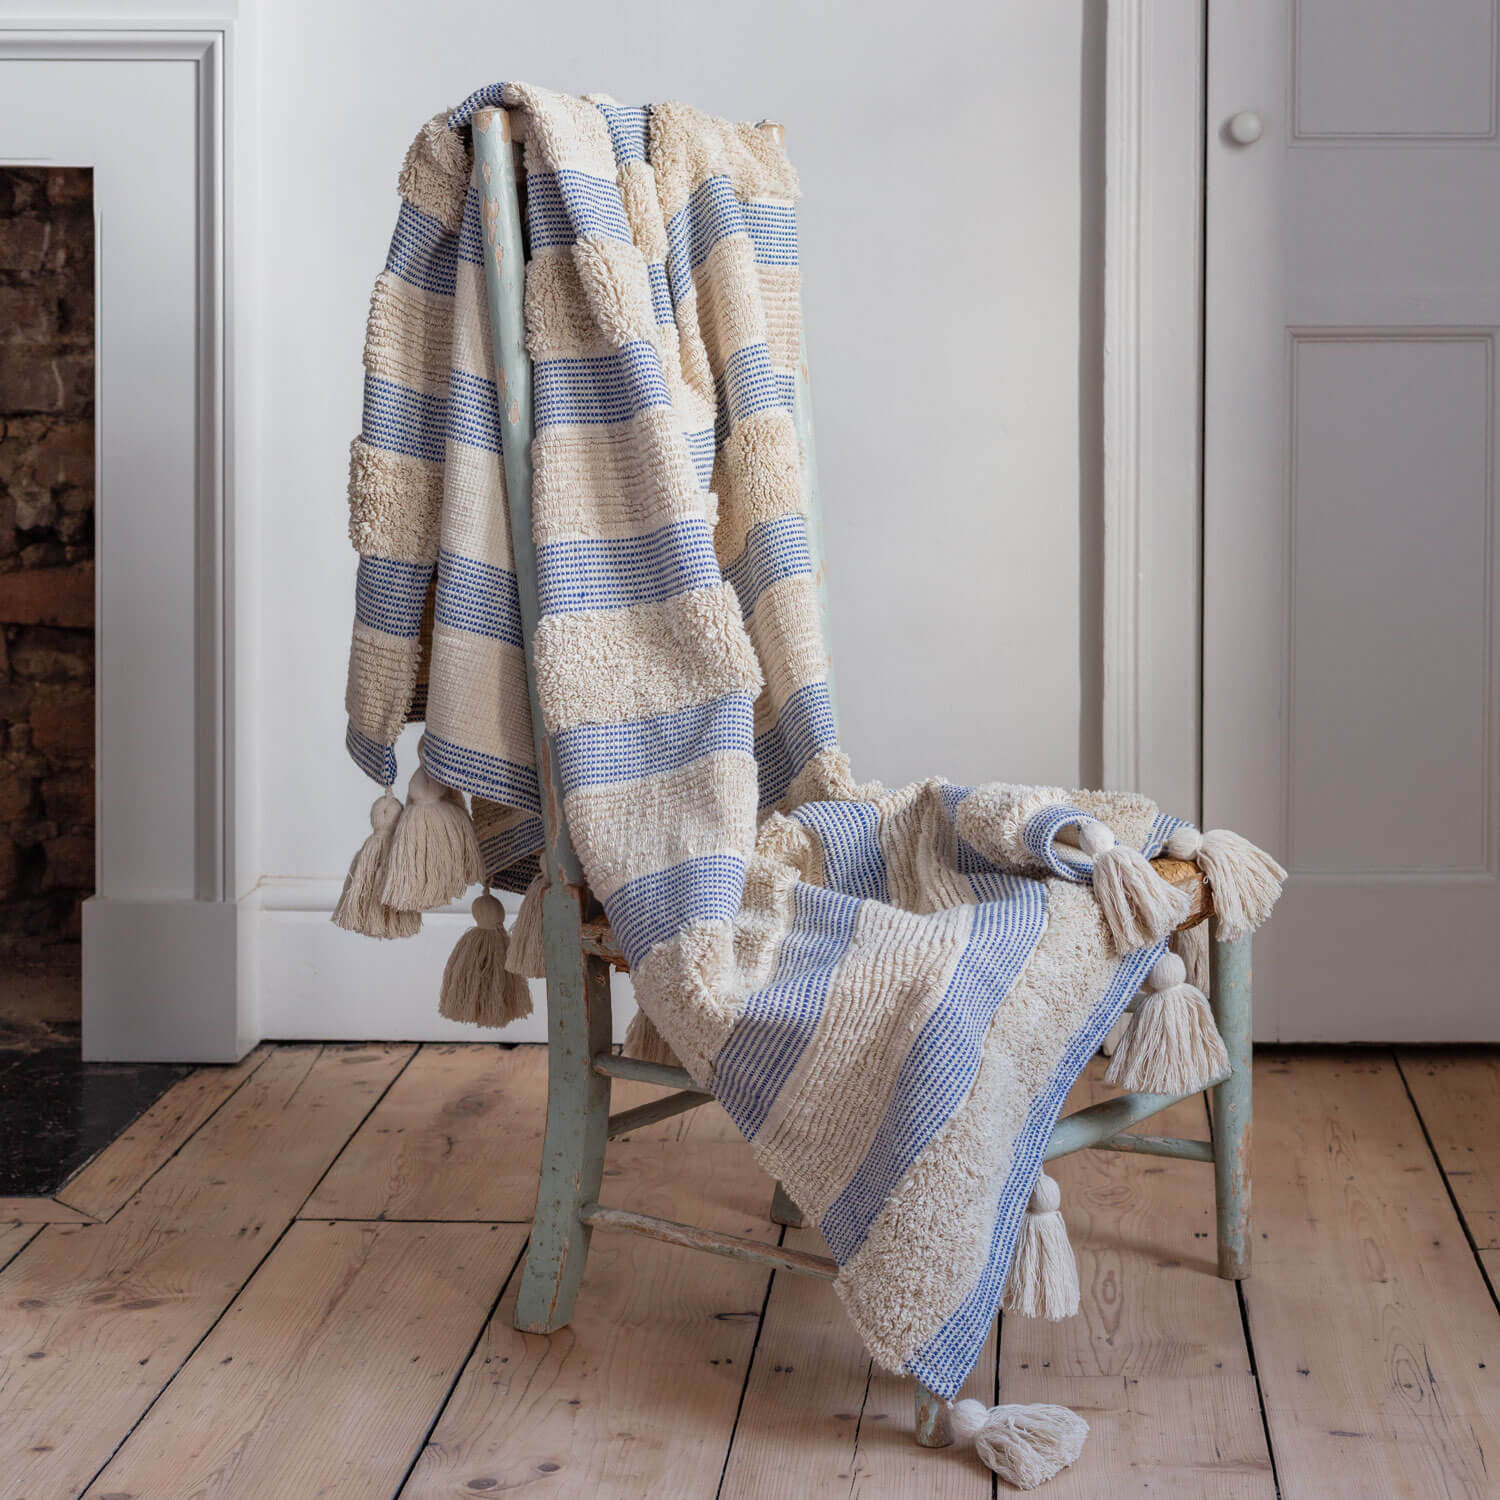 Read more about Graham and green misty blue and white striped throw